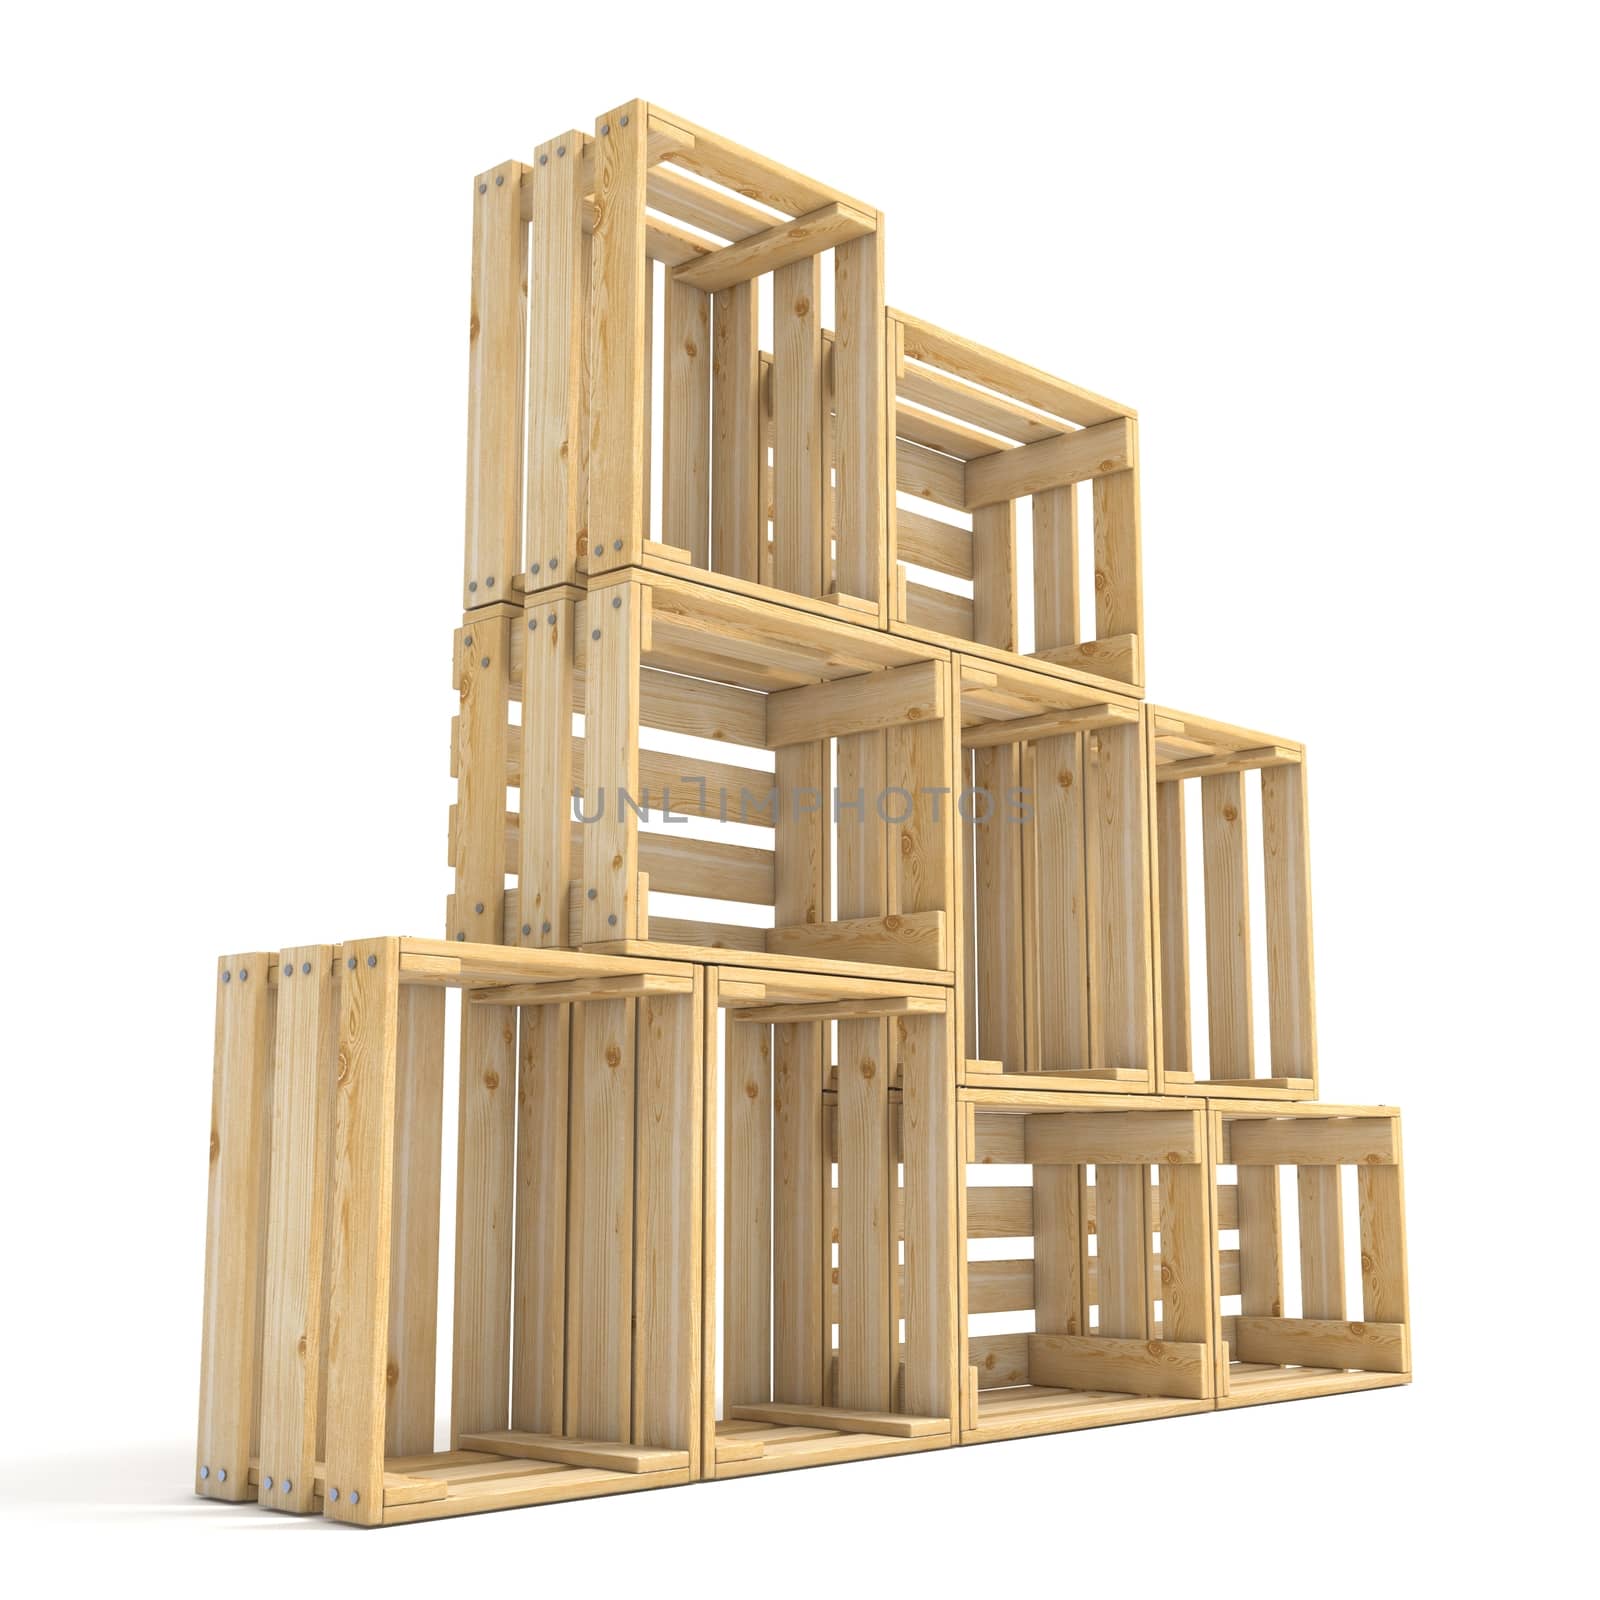 Empty wooden crates arranged Side view 3D render illustration isolated on white background